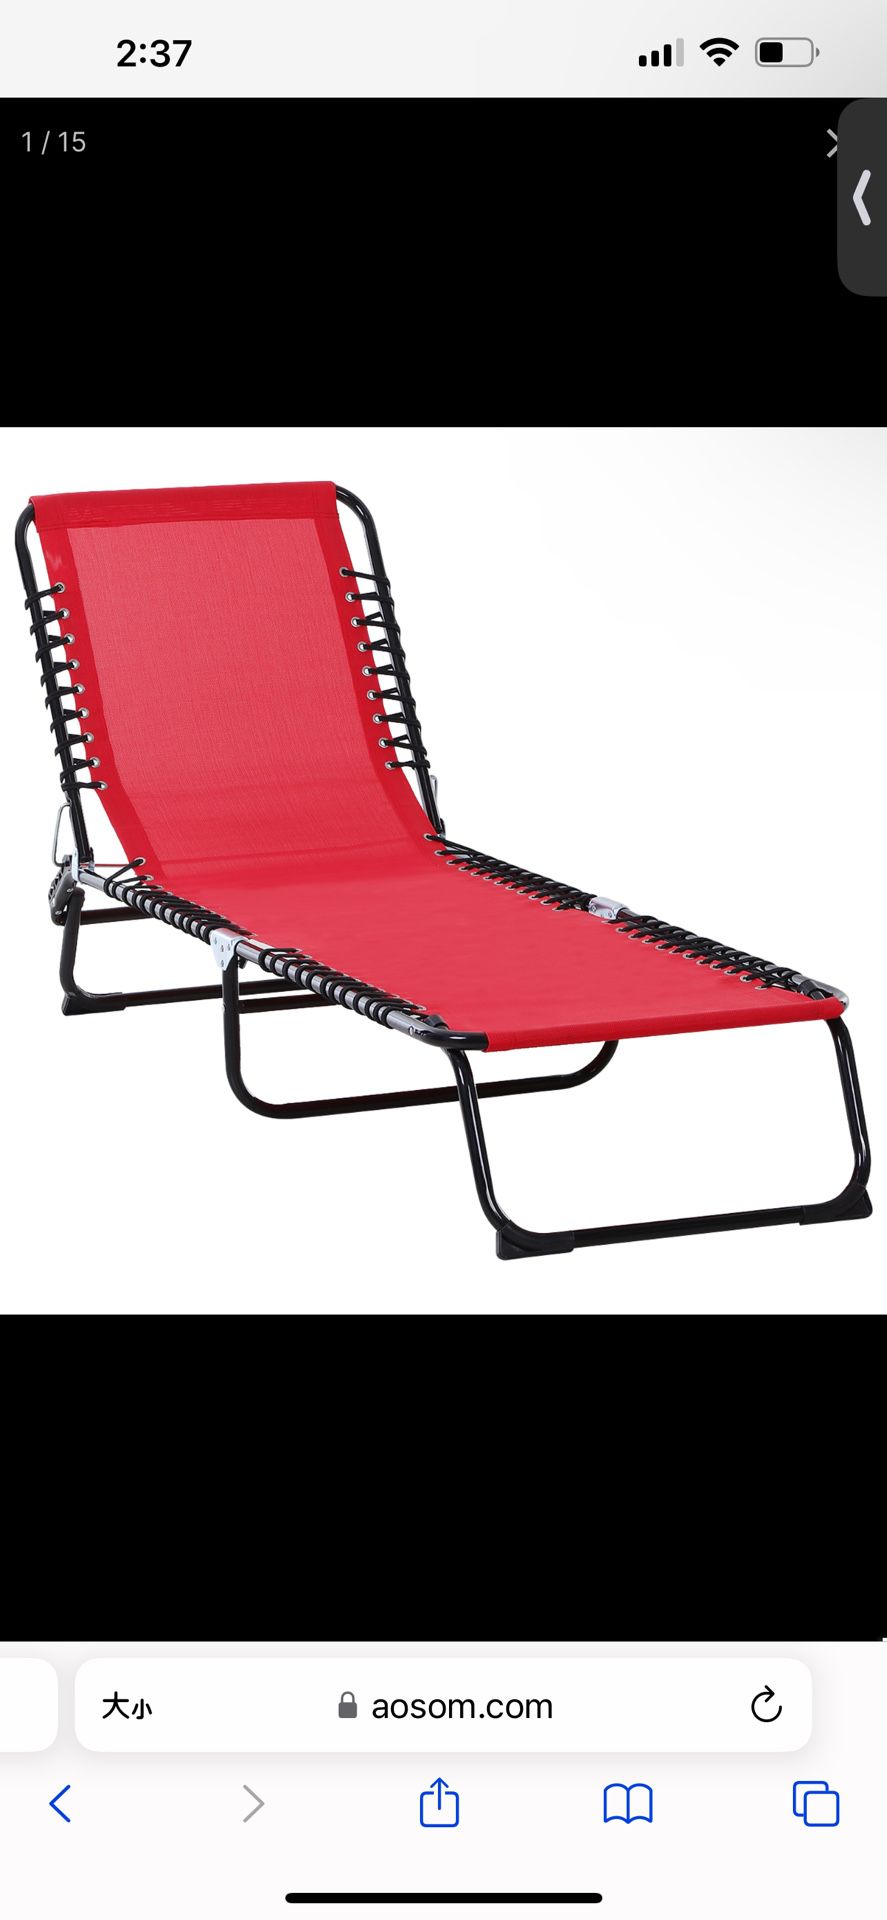 New in box Folding Chaise Lounge Pool Chair Set of 2, Patio Sun Tanning Chair, Outdoor Lounge Chair w/Reclining Back, Pillow, Breathable Mesh & Bungee